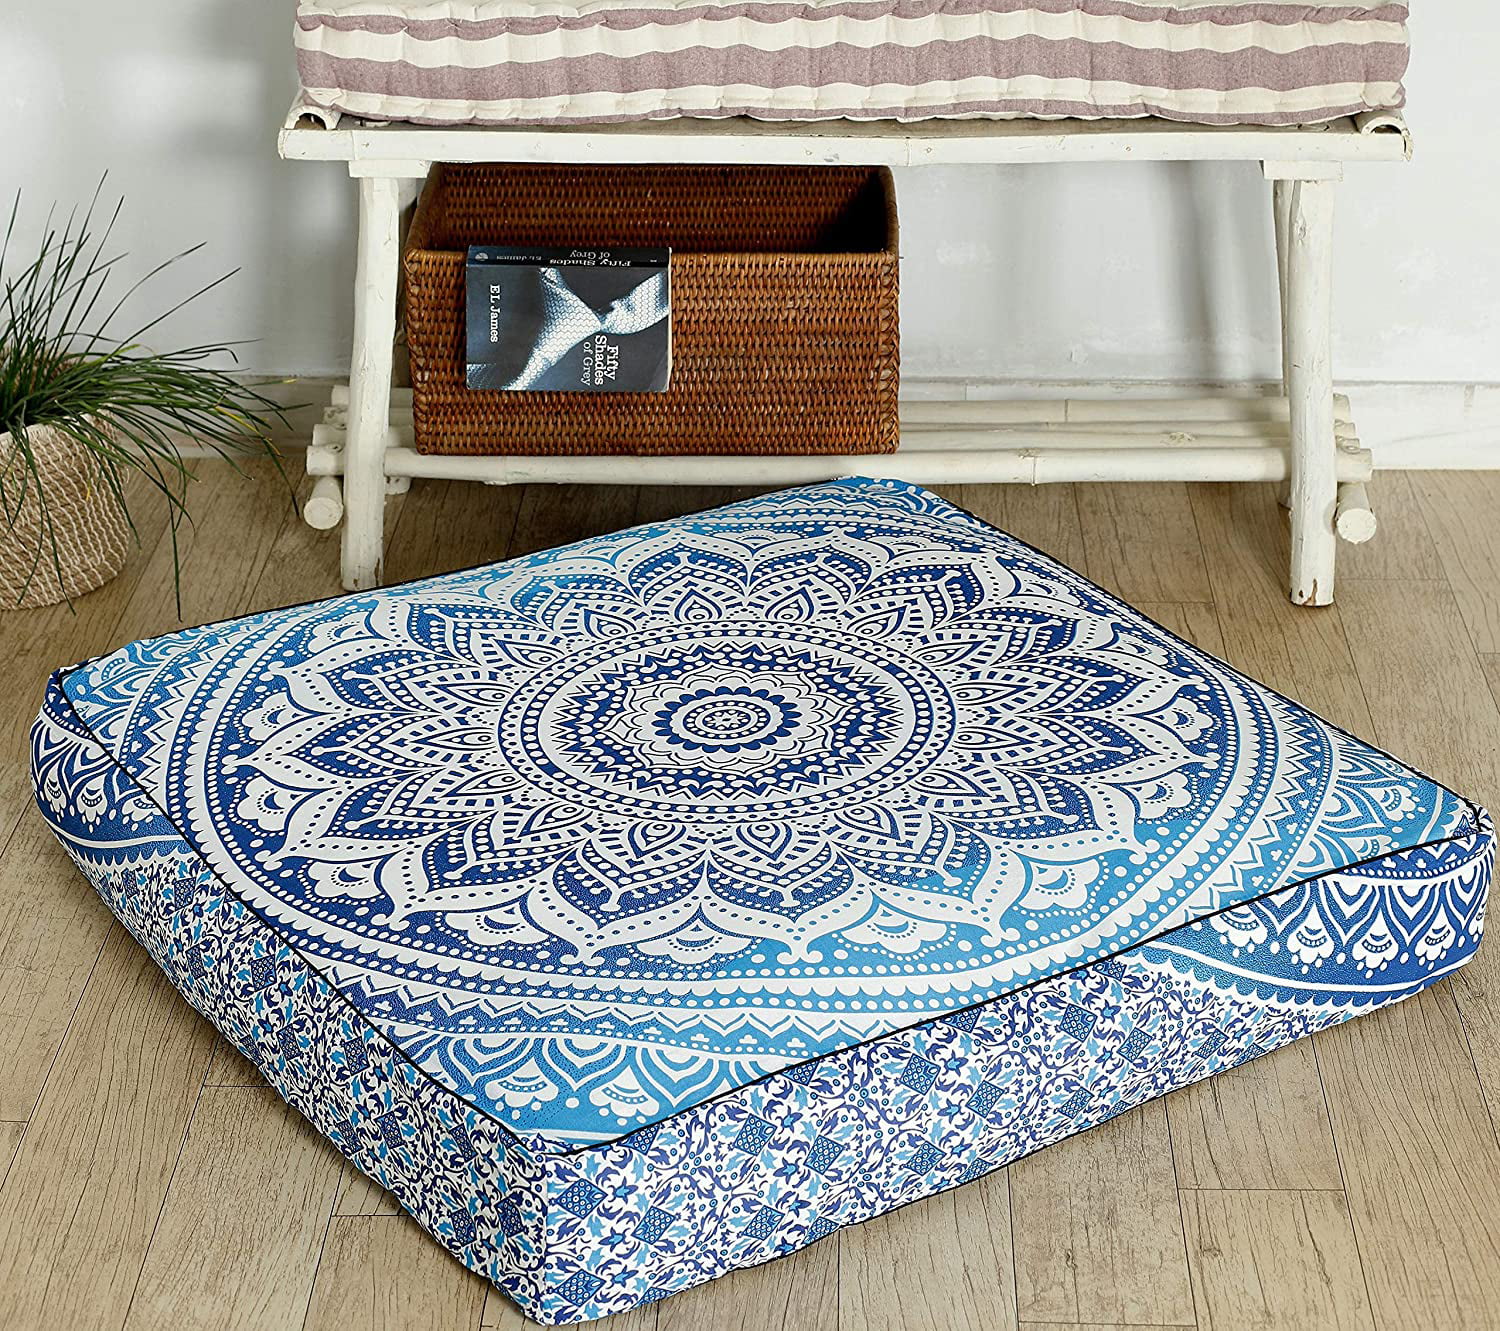 35"x 35" Cotton Floor Pillow Cover Square Mandala Ombre Meditation Cushion Cover